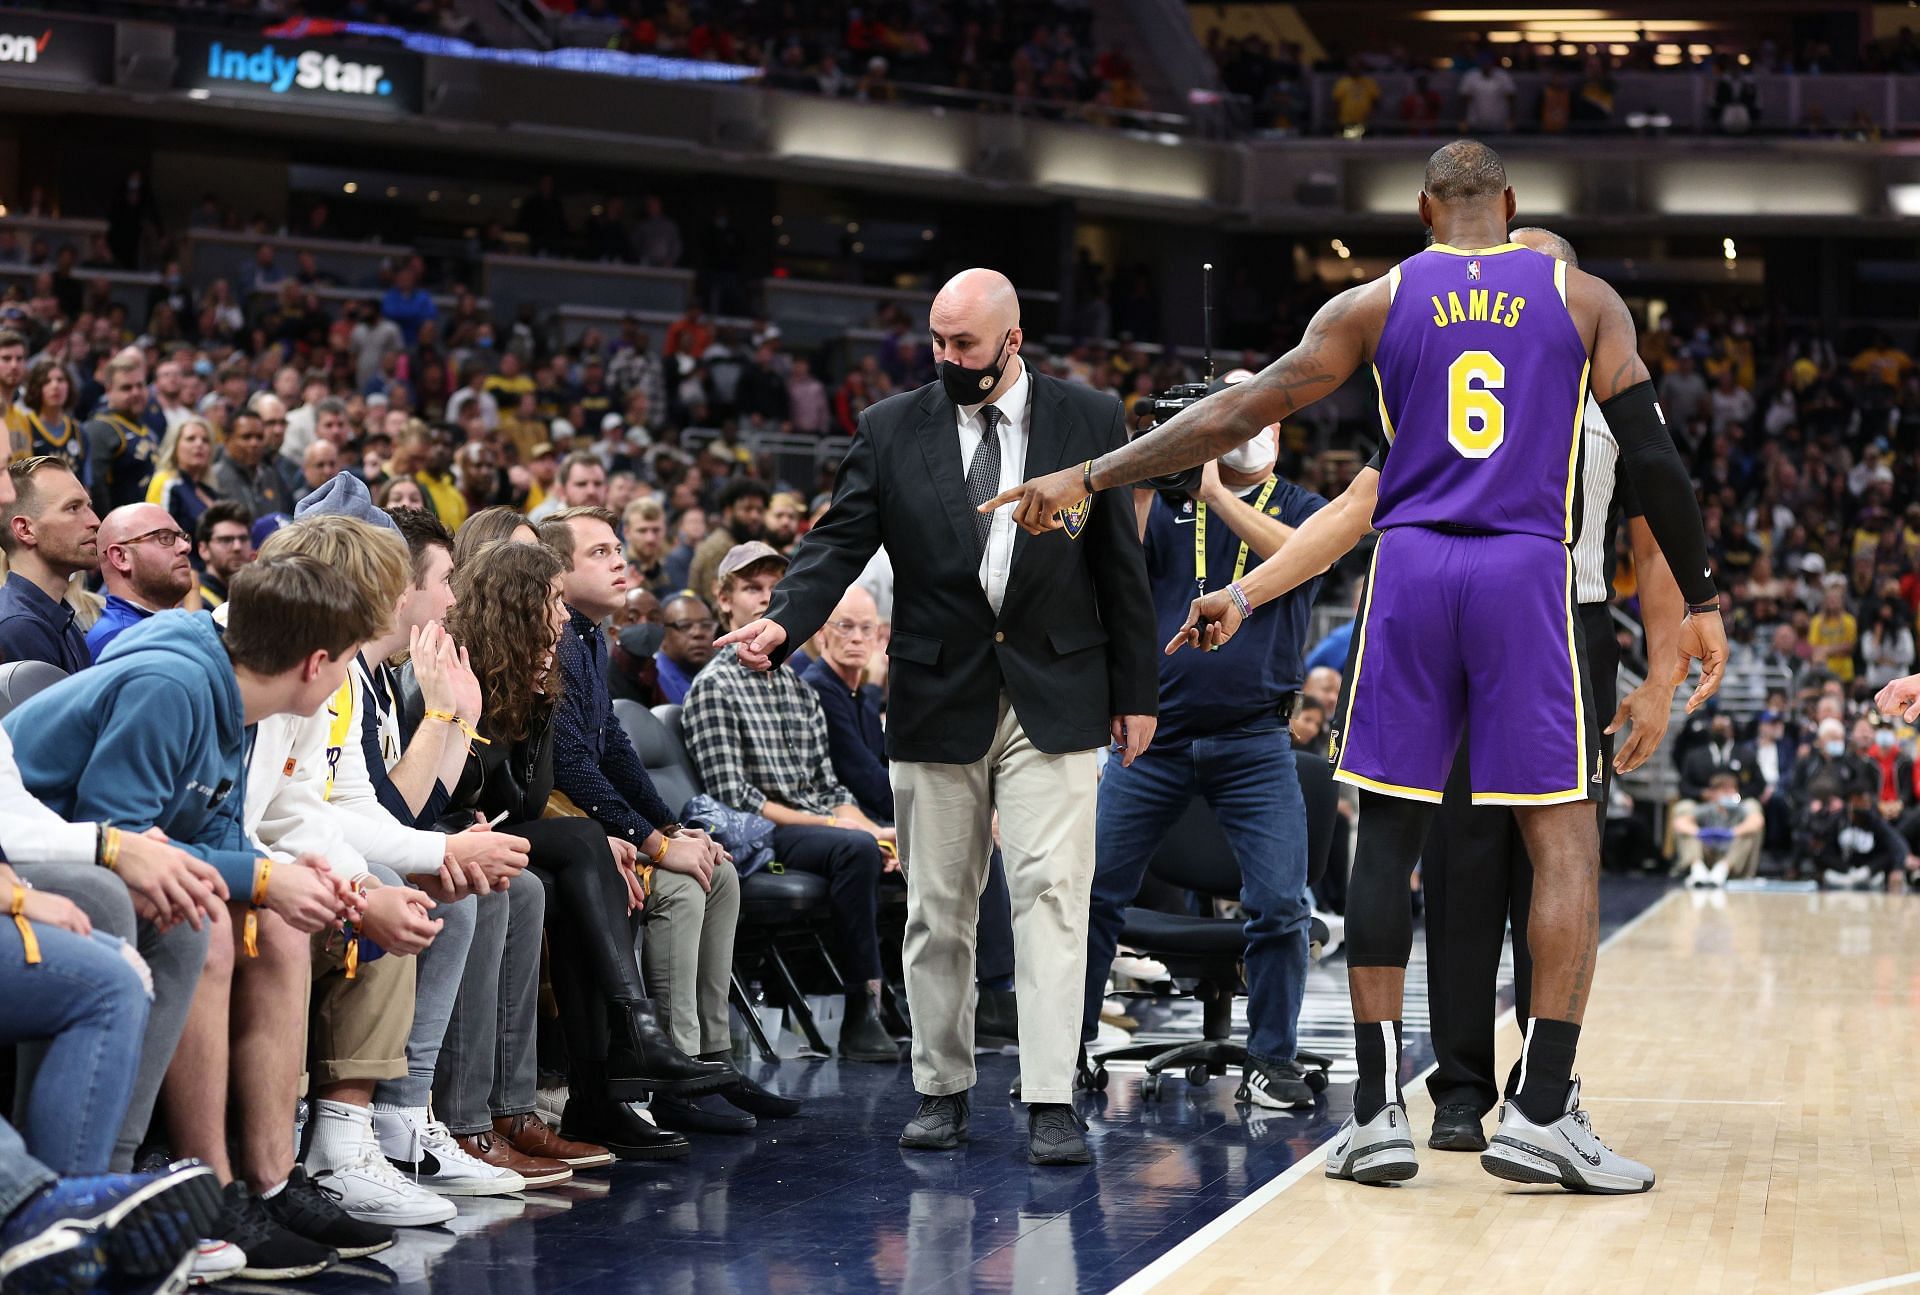 Los Angeles Lakers forward LeBron James before the removal of two courtside spectators